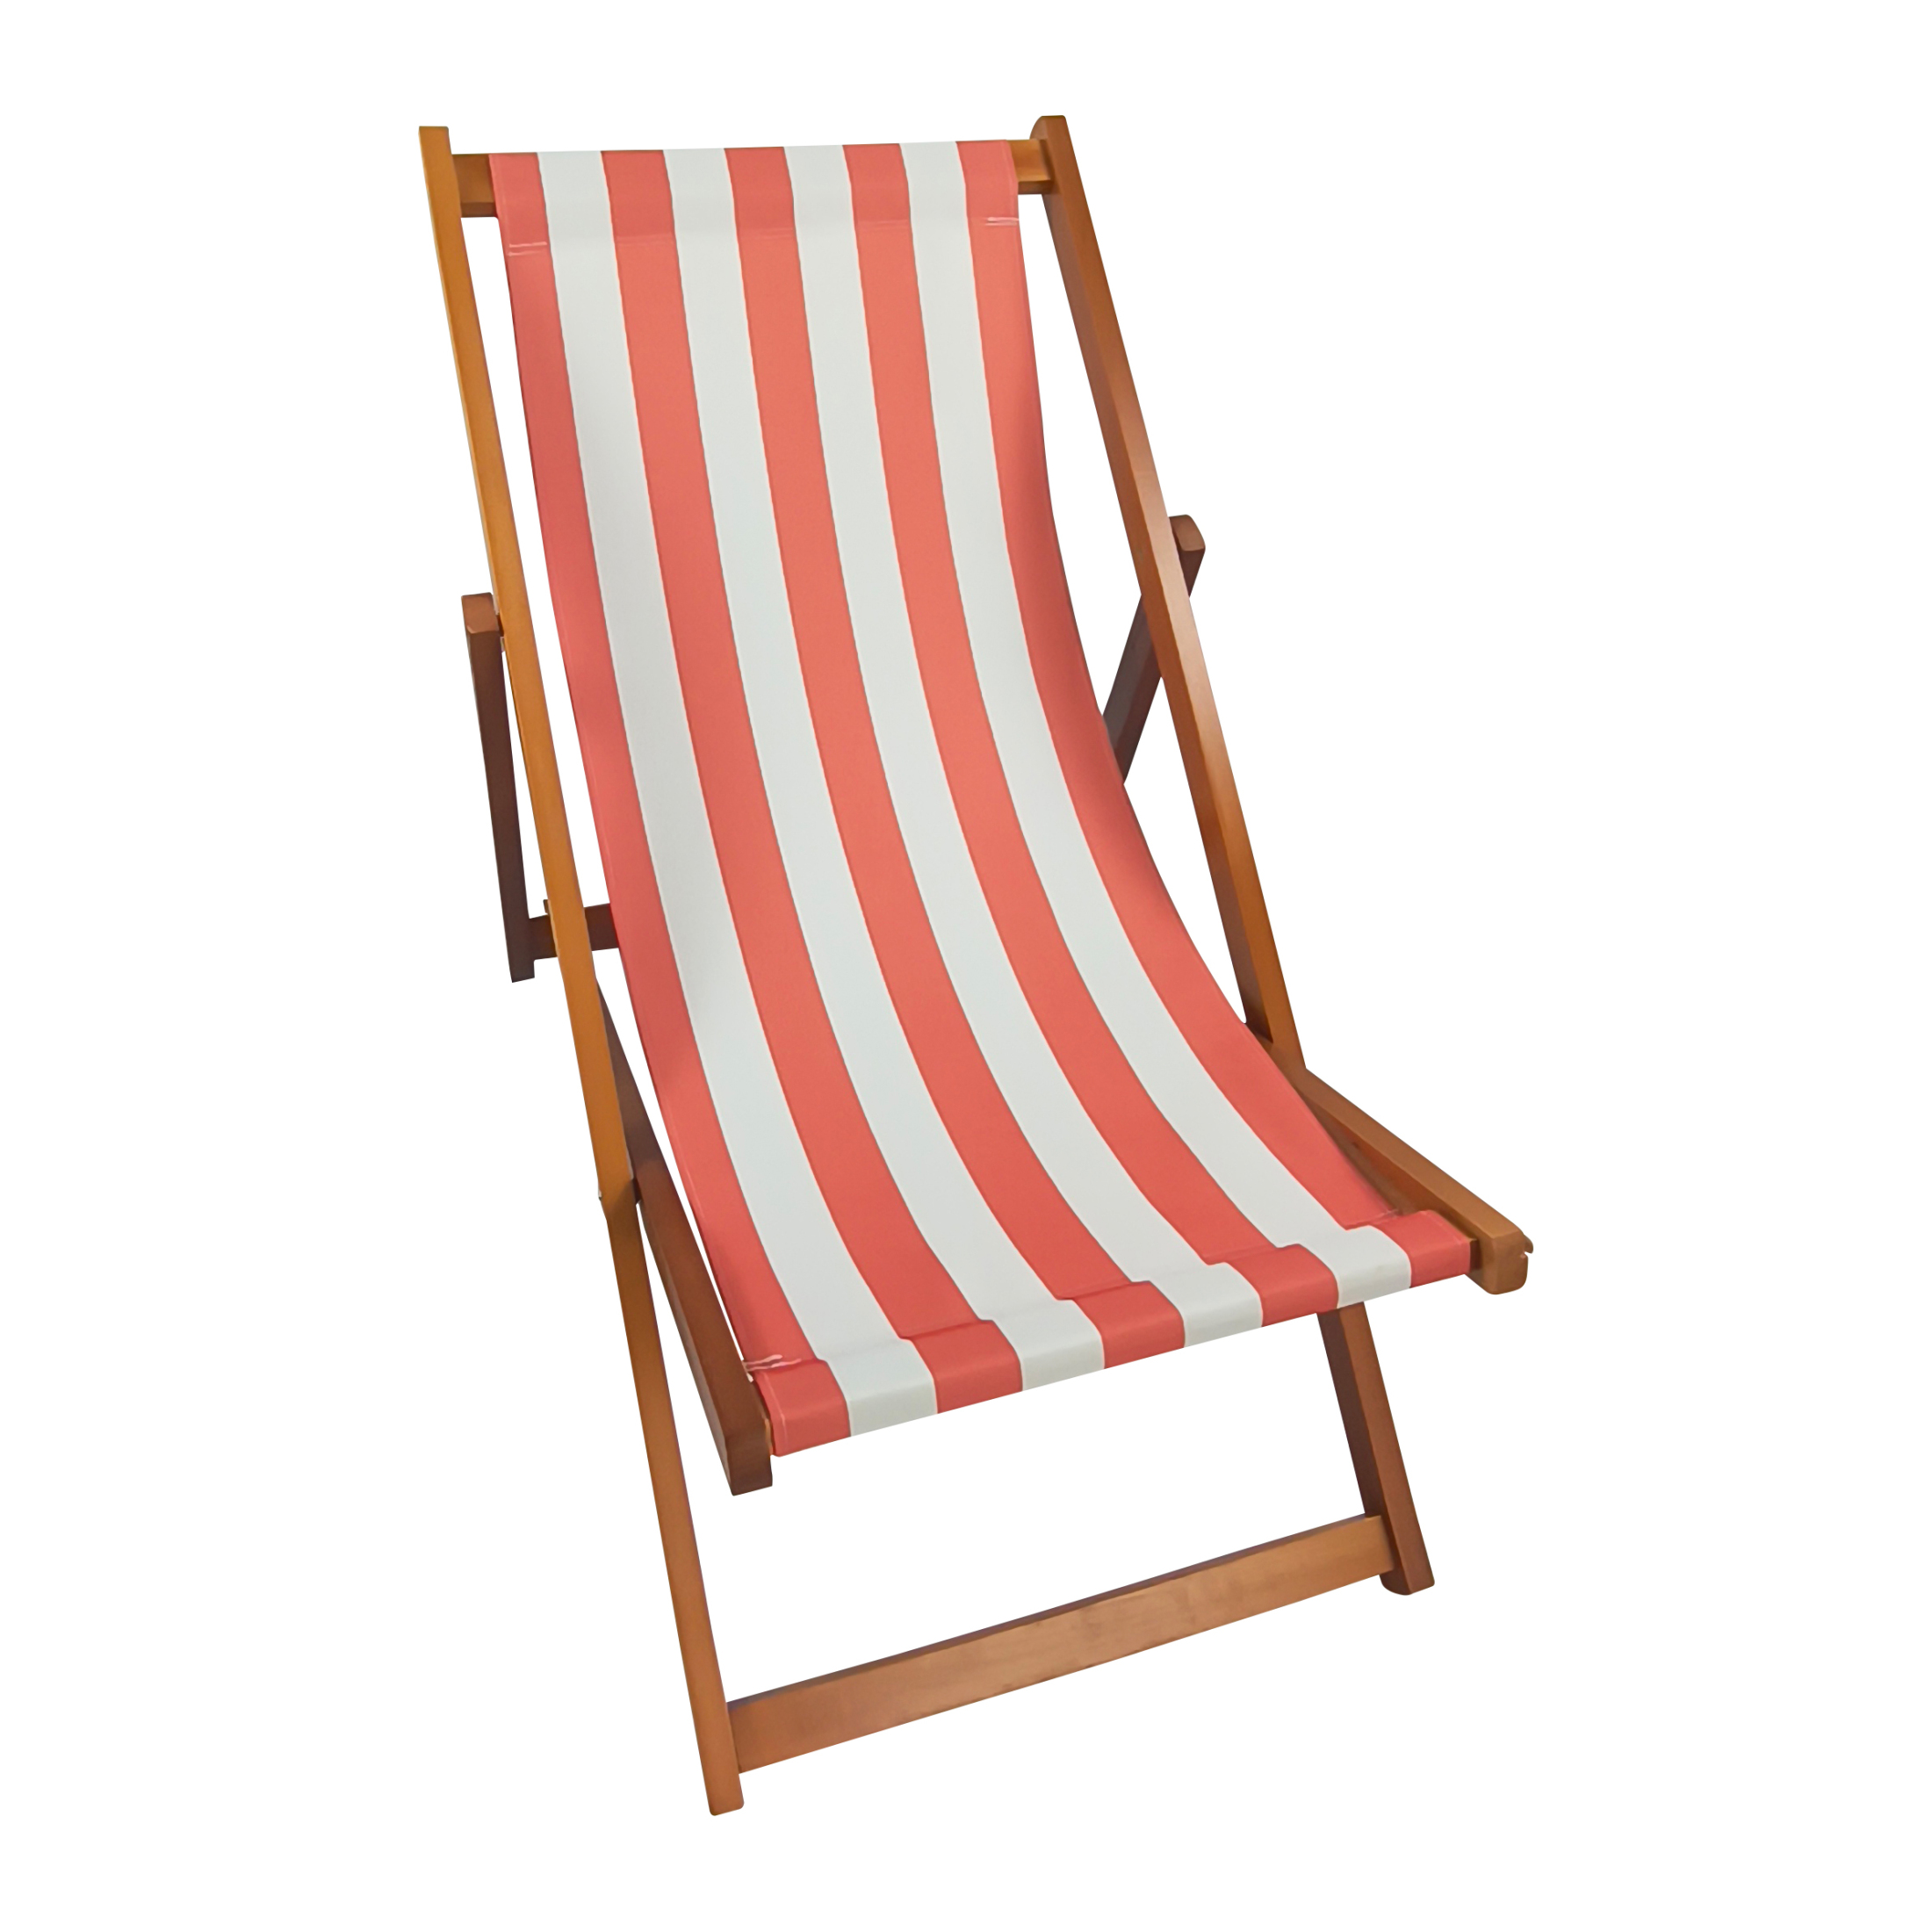 Pouseayar Foldable Sling Chair,Outdoor Beach Chair Chaise Lounge, Orang - image 5 of 7